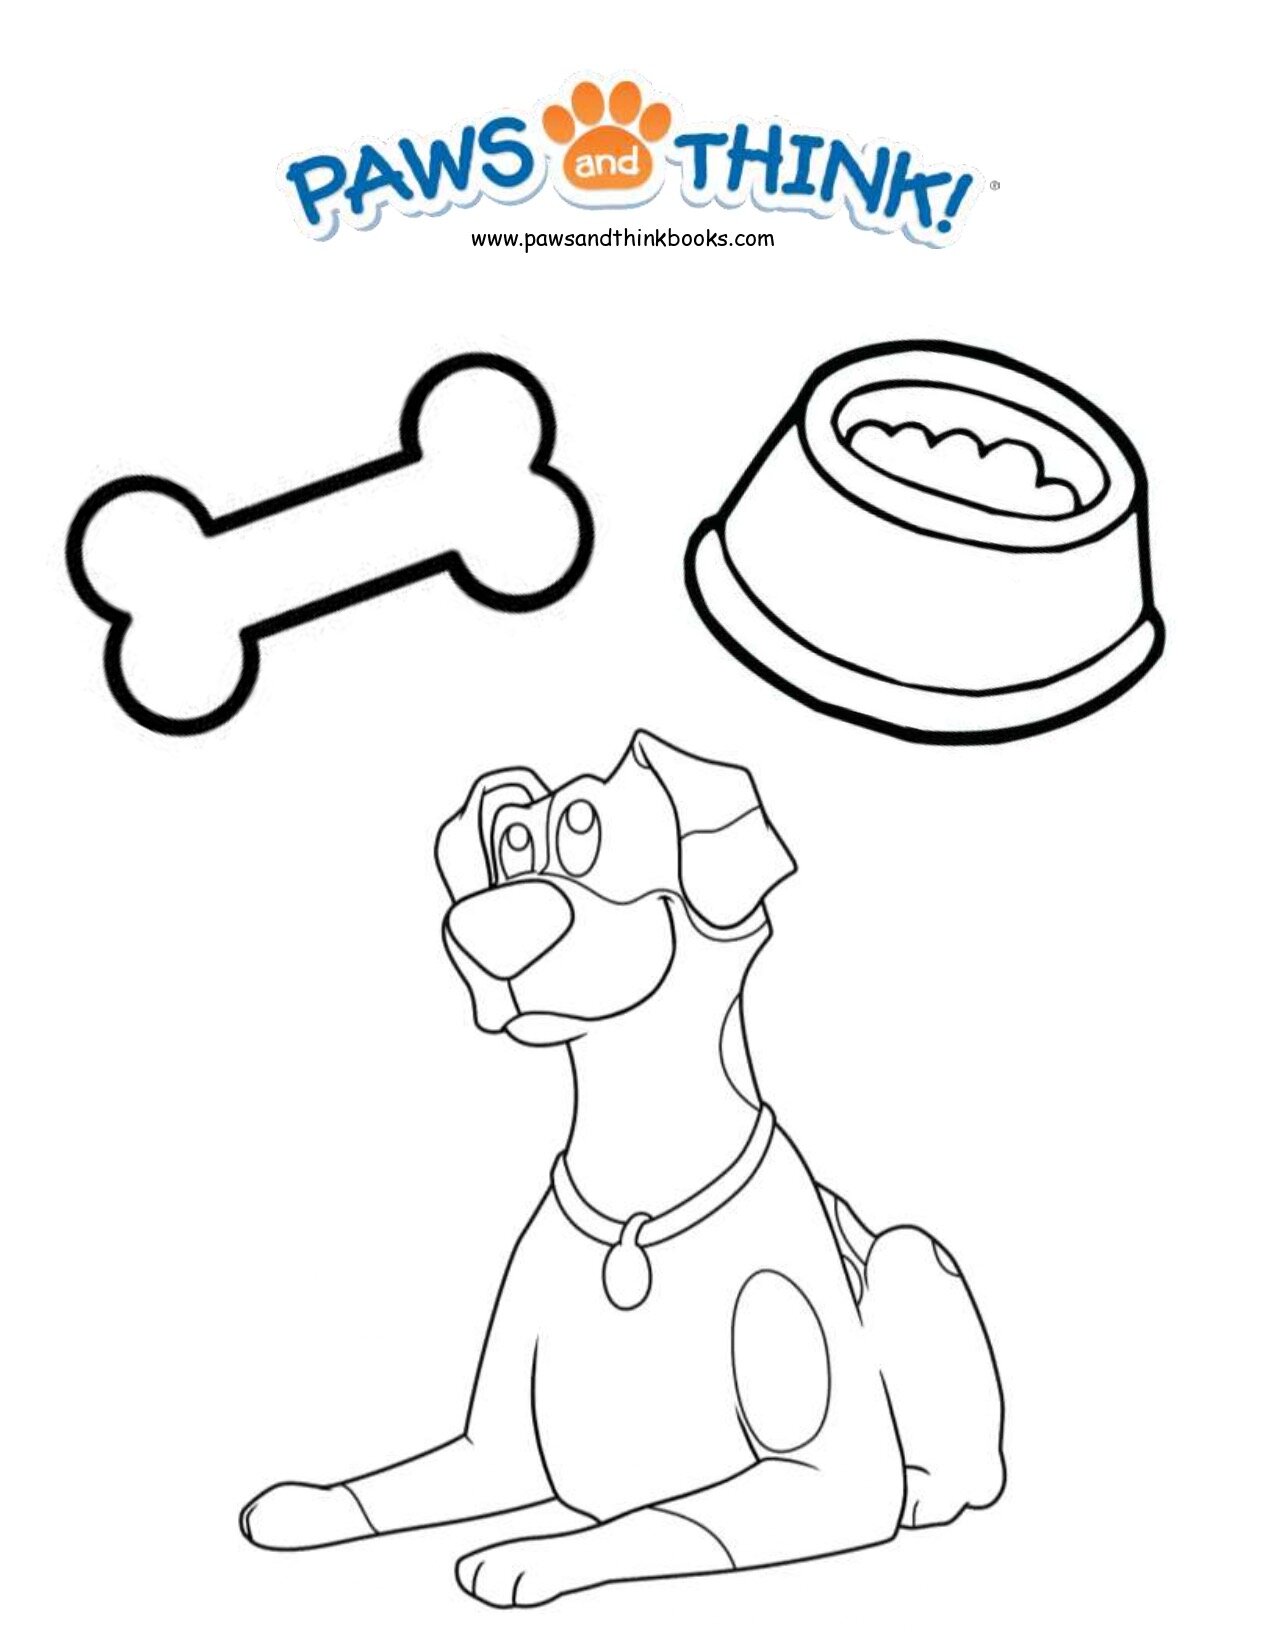 Coloring Page 3.JPG